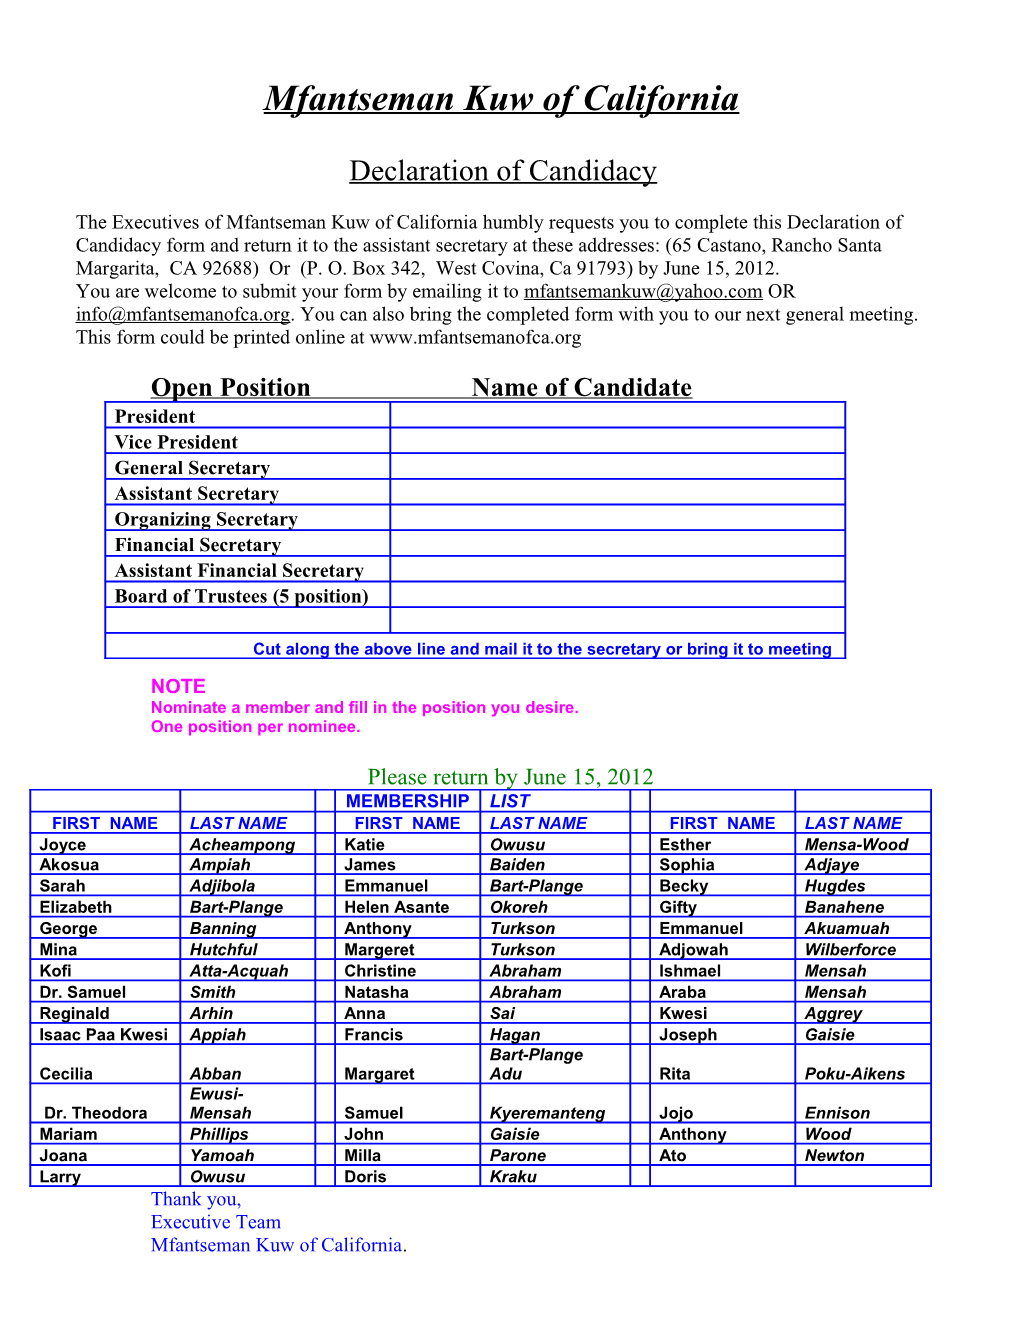 Declaration of Candidacy